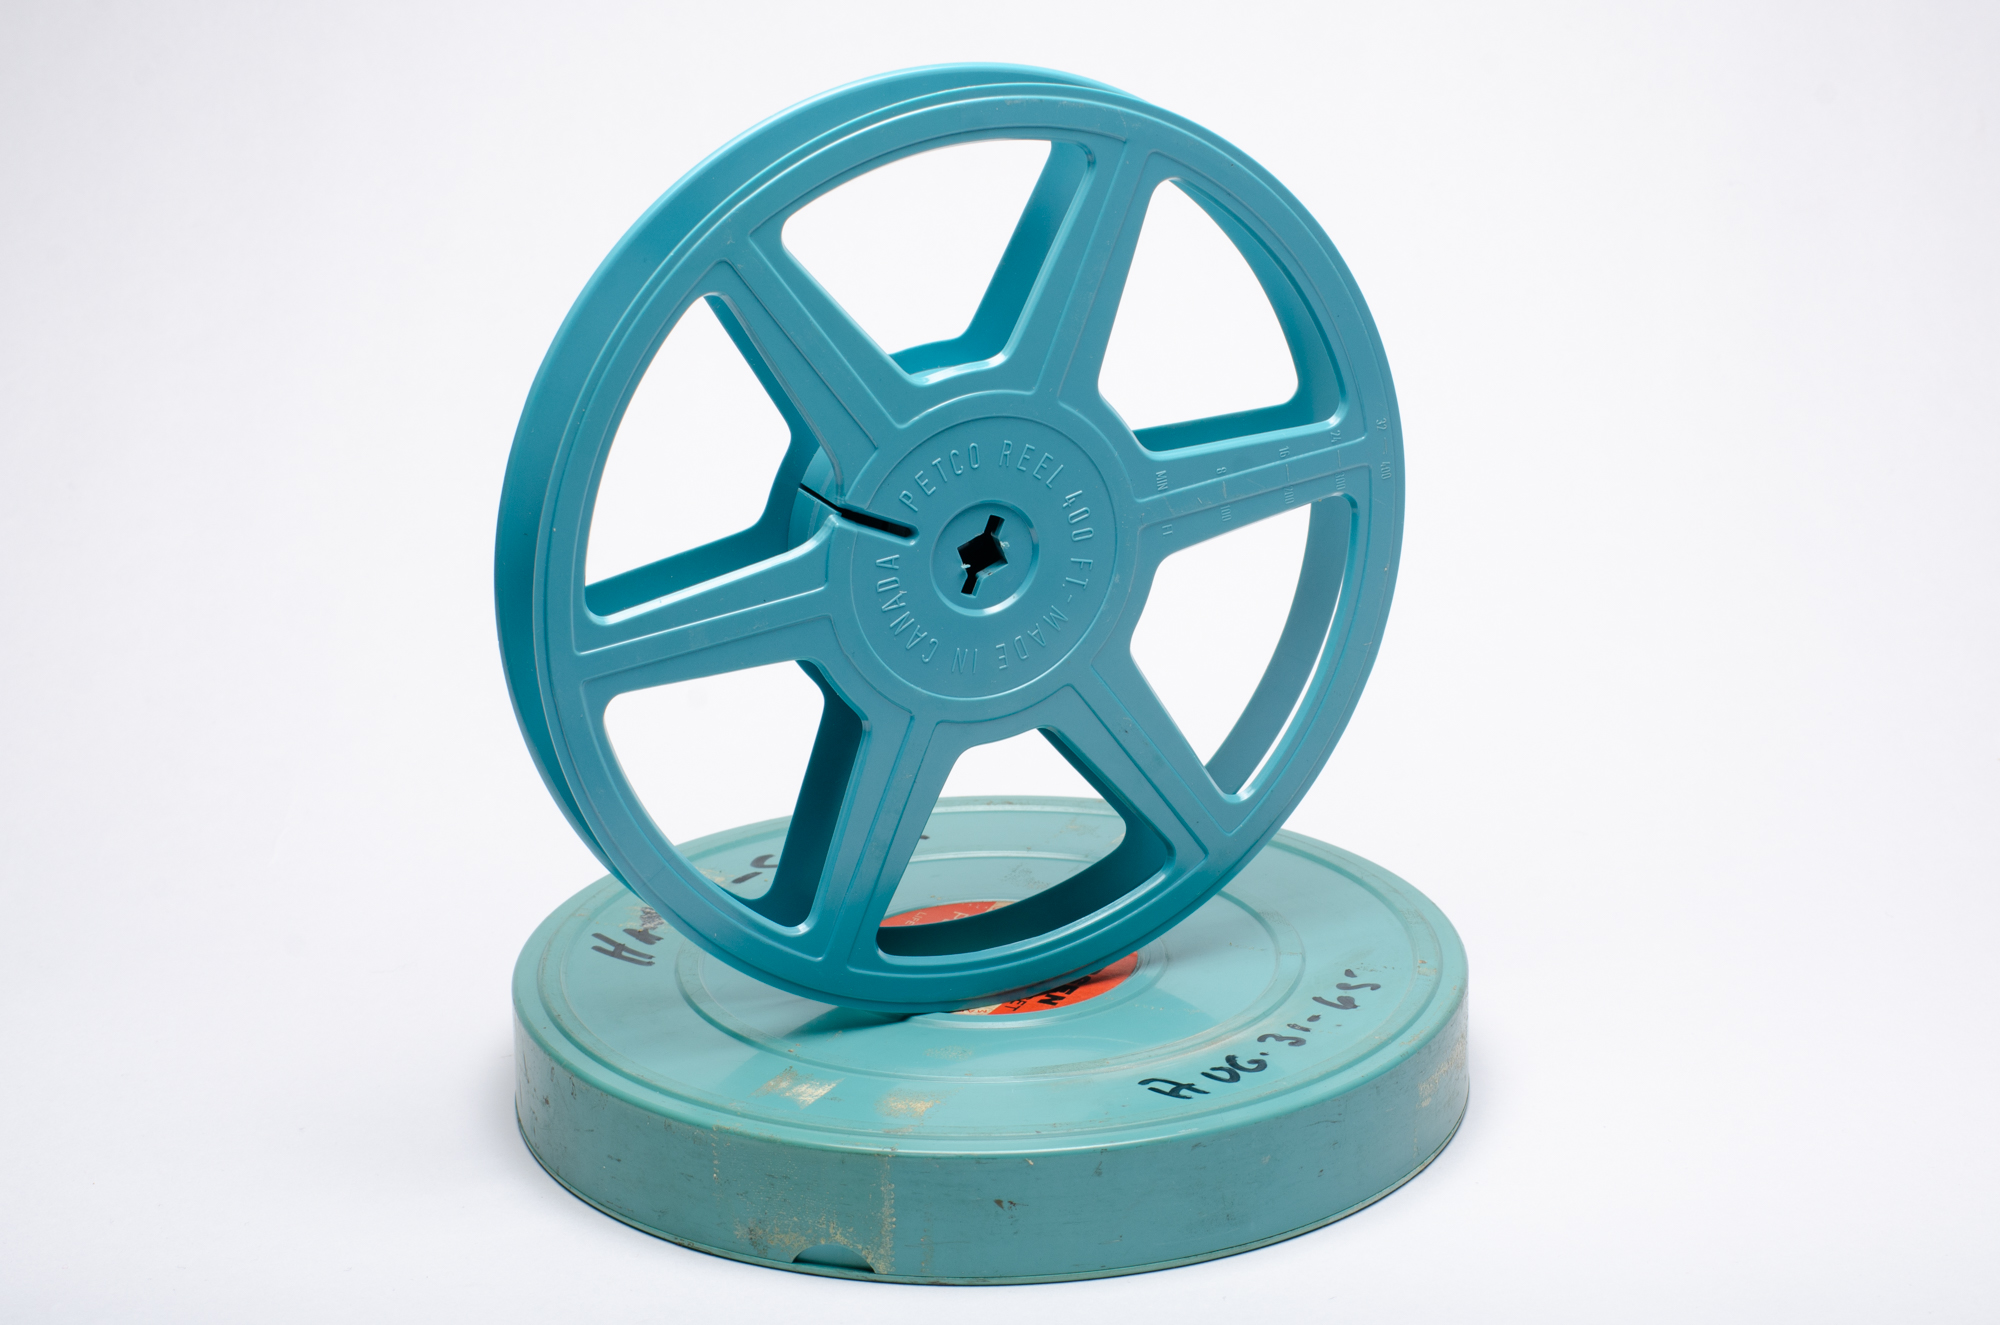 16mm 400ft Plastic Reel and Can (USED)